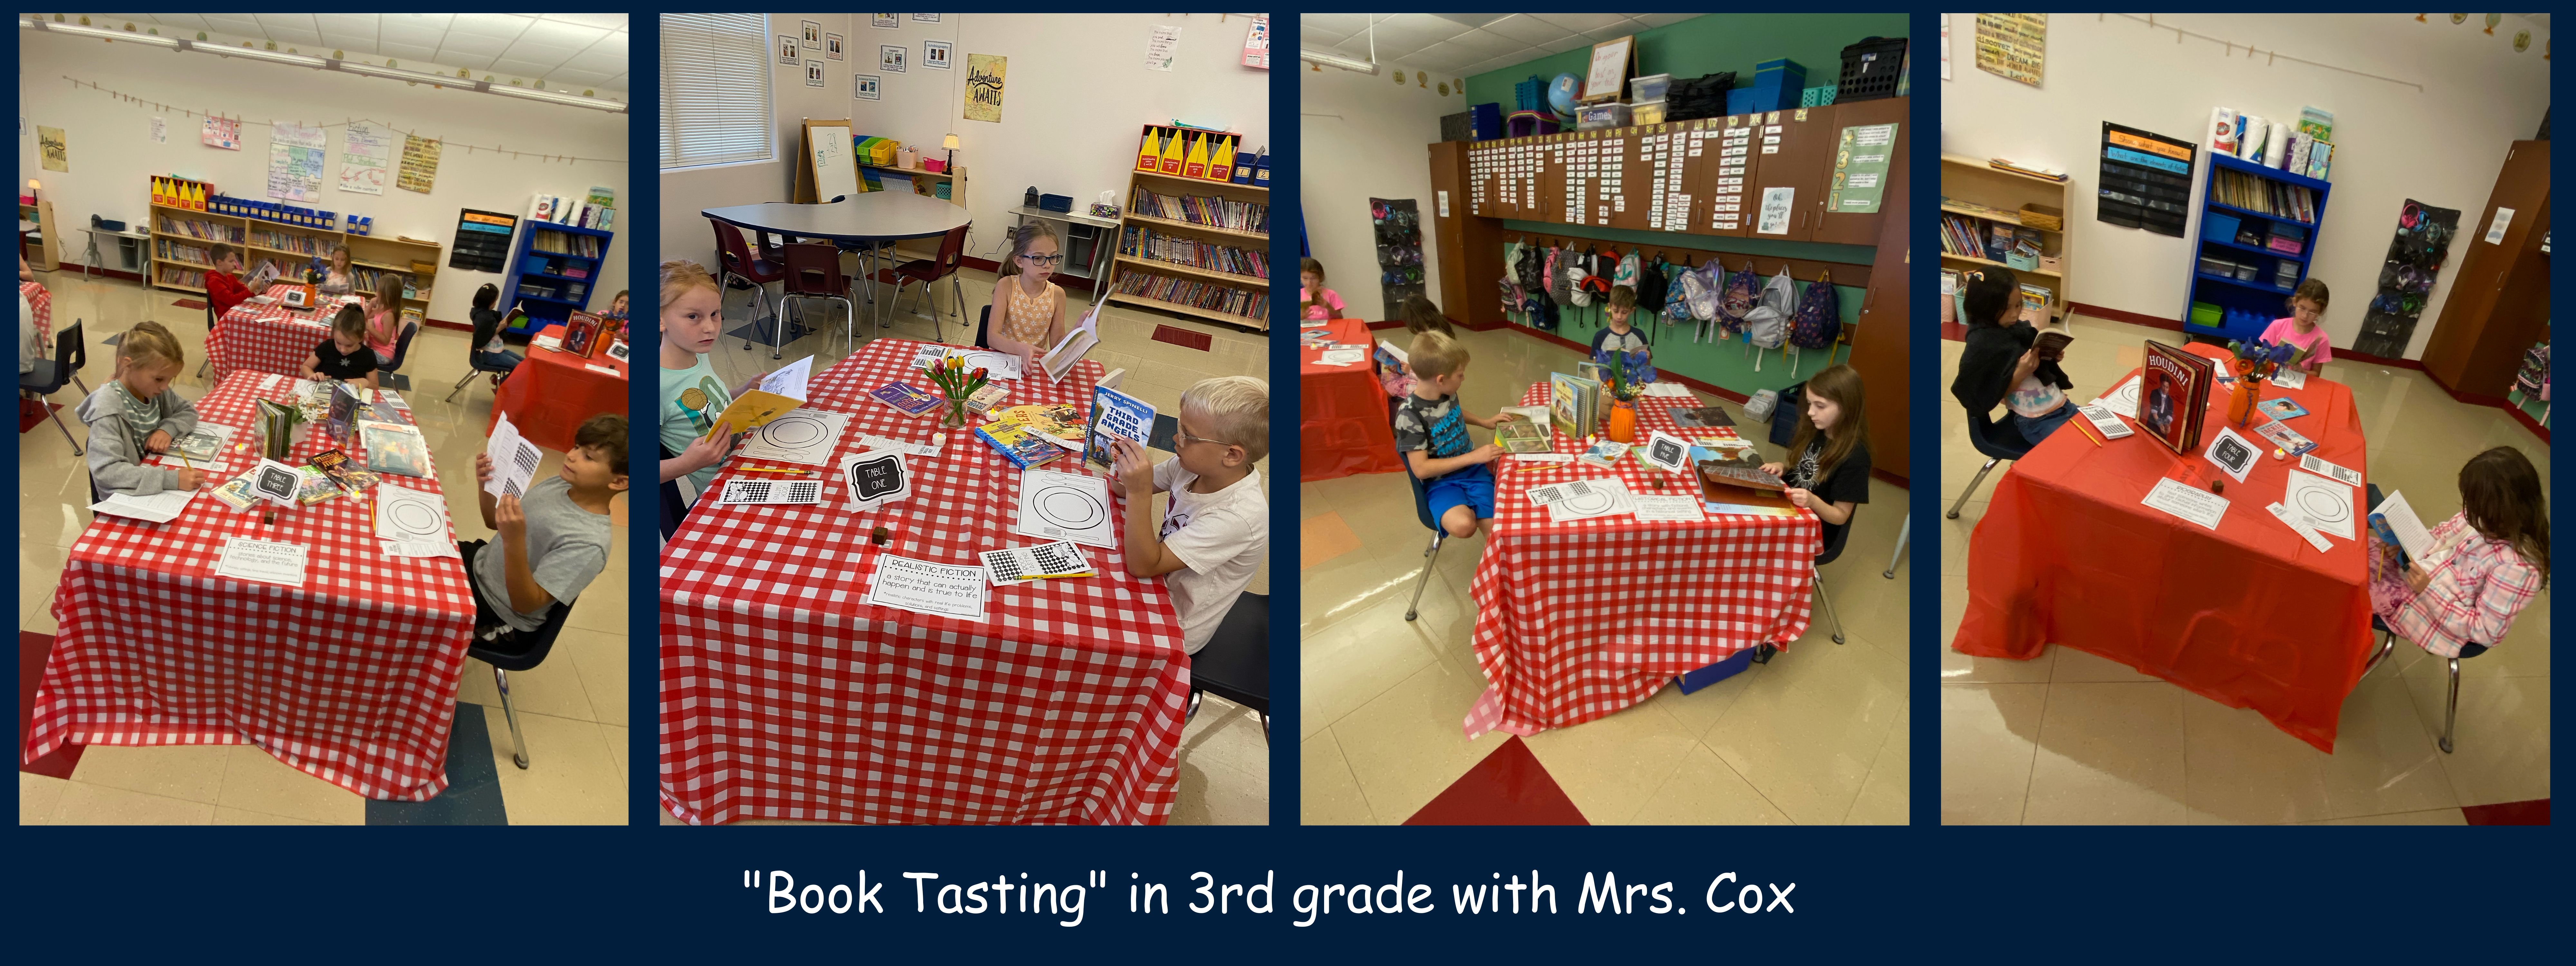 "Book Tasting" in 3rd grade with Mrs. Cox